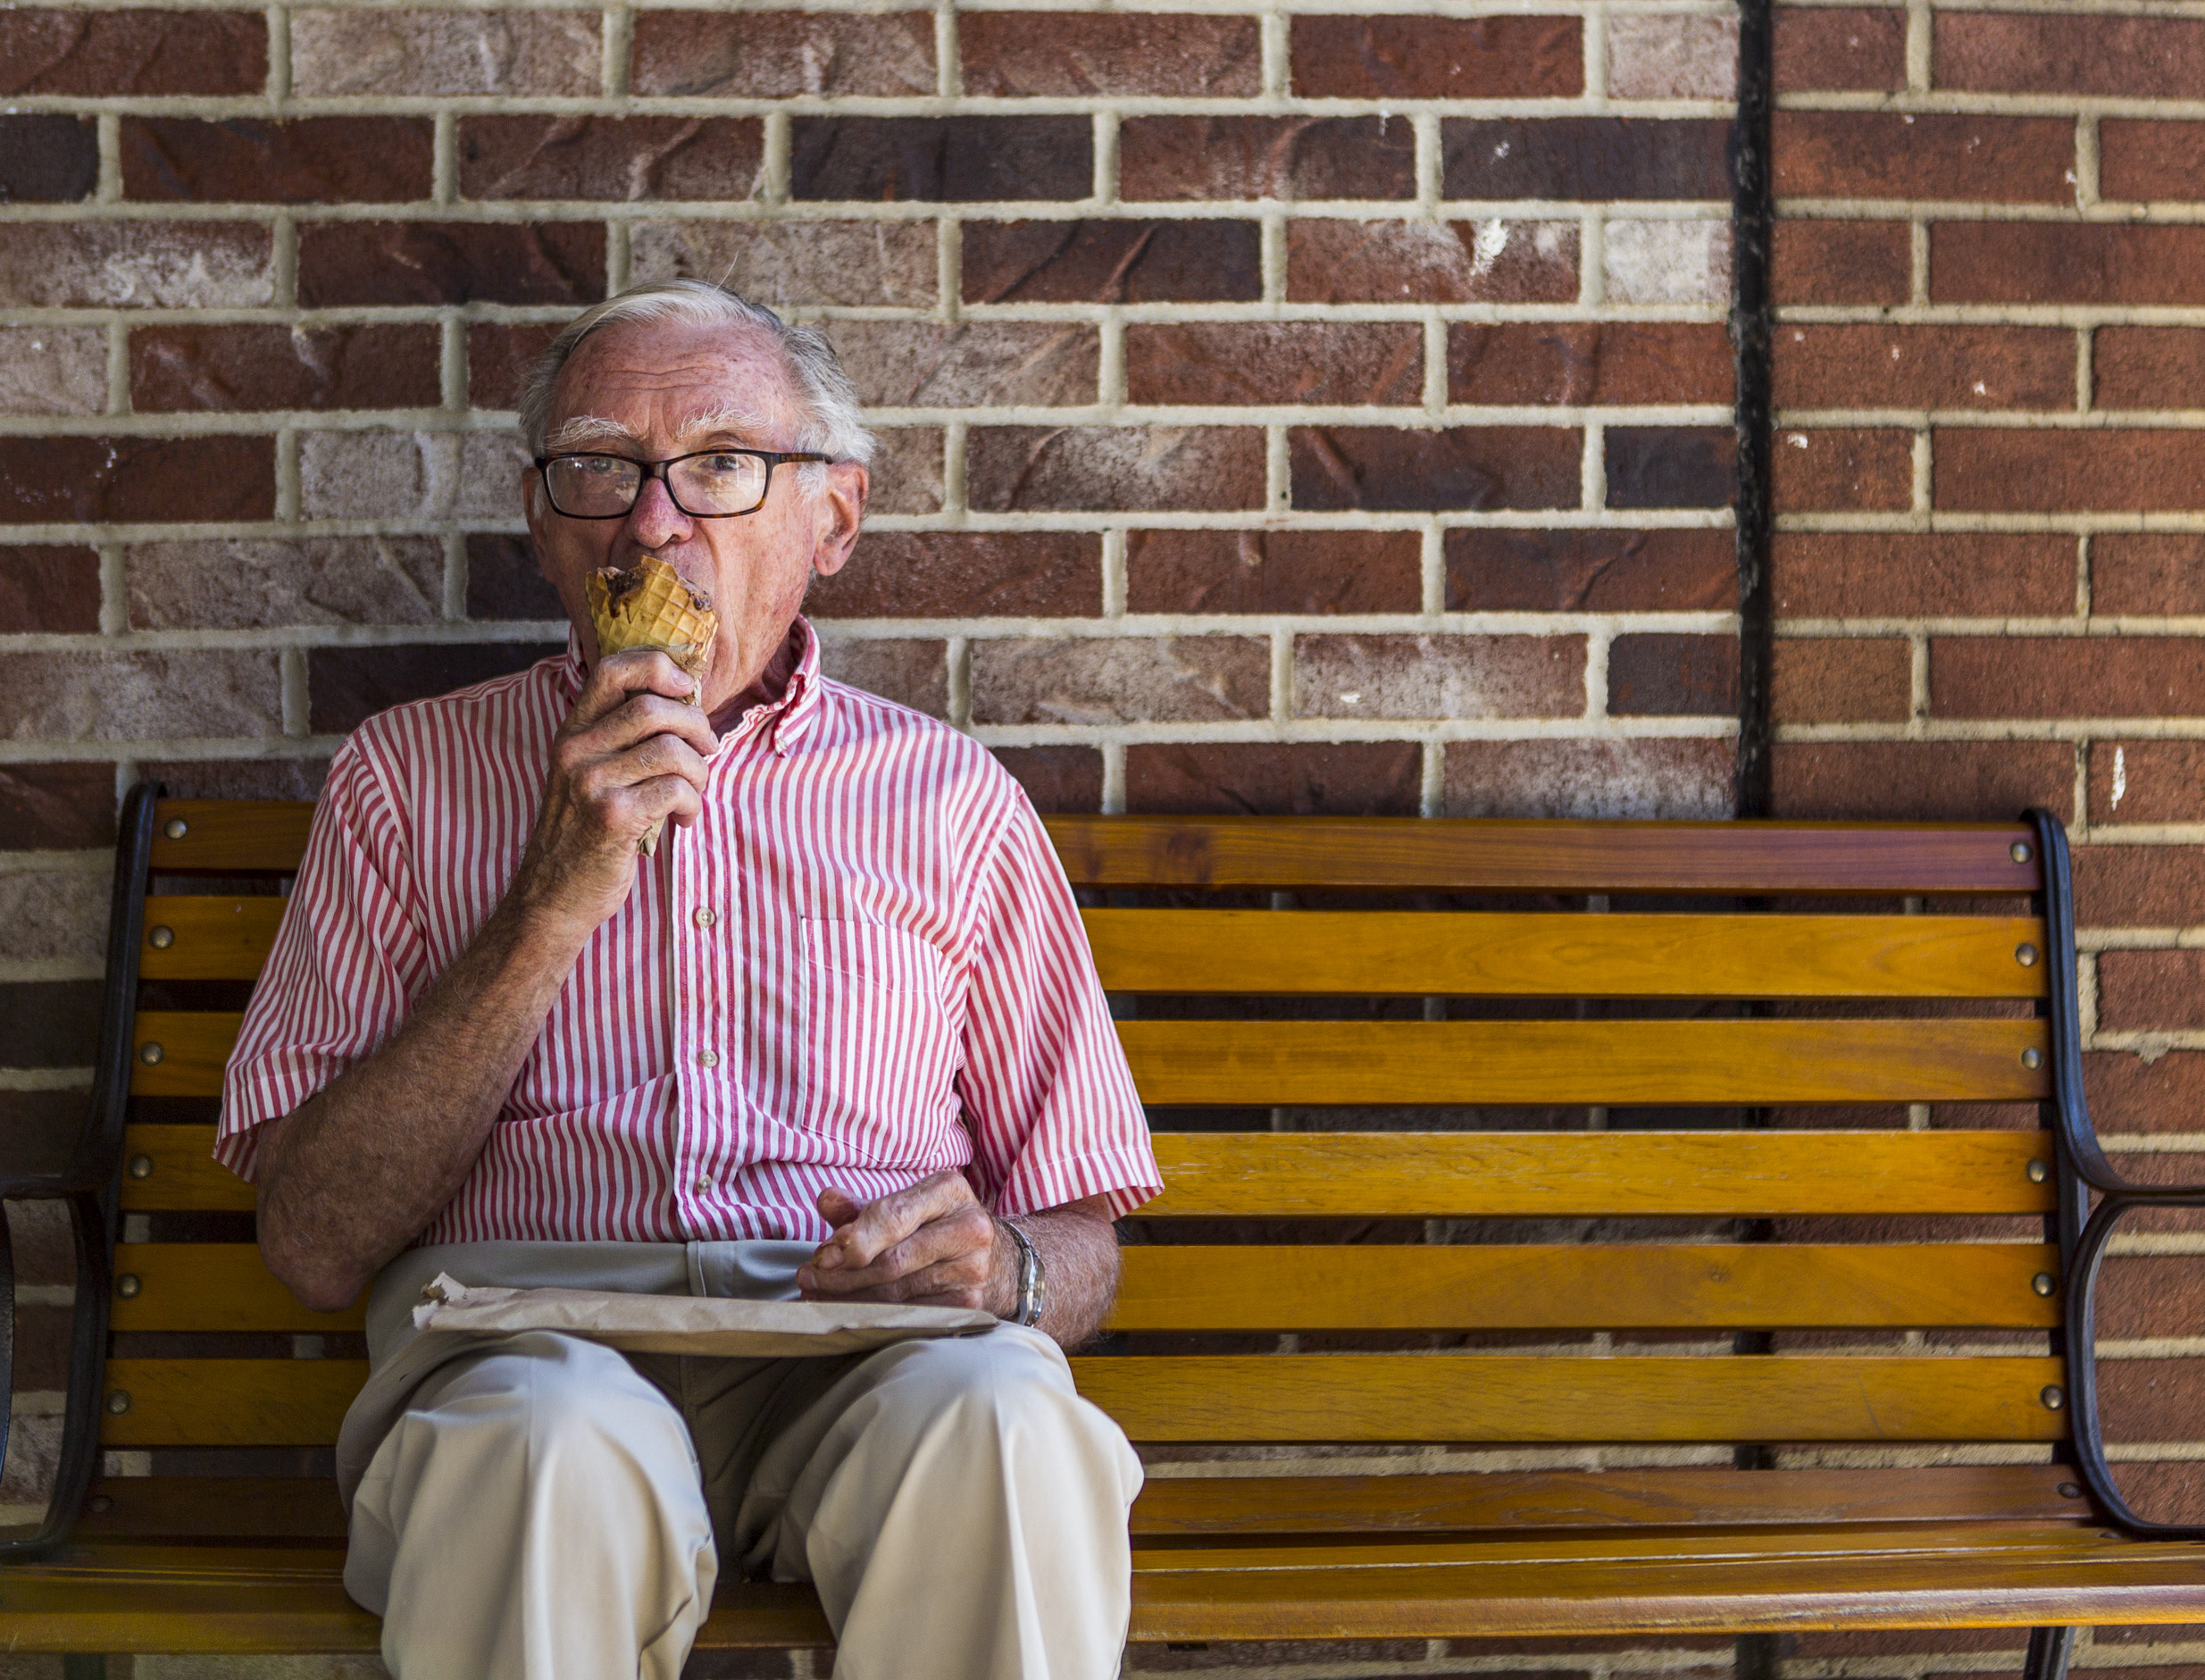  Tom Hitner of Ligonier, 82, enjoys his ice cream from the Ligonier Creamery on Monday, July 11, 2016. Hitner has lived in Ligonier for most of his life and goes to the creamery whenever he happens to walk by. 